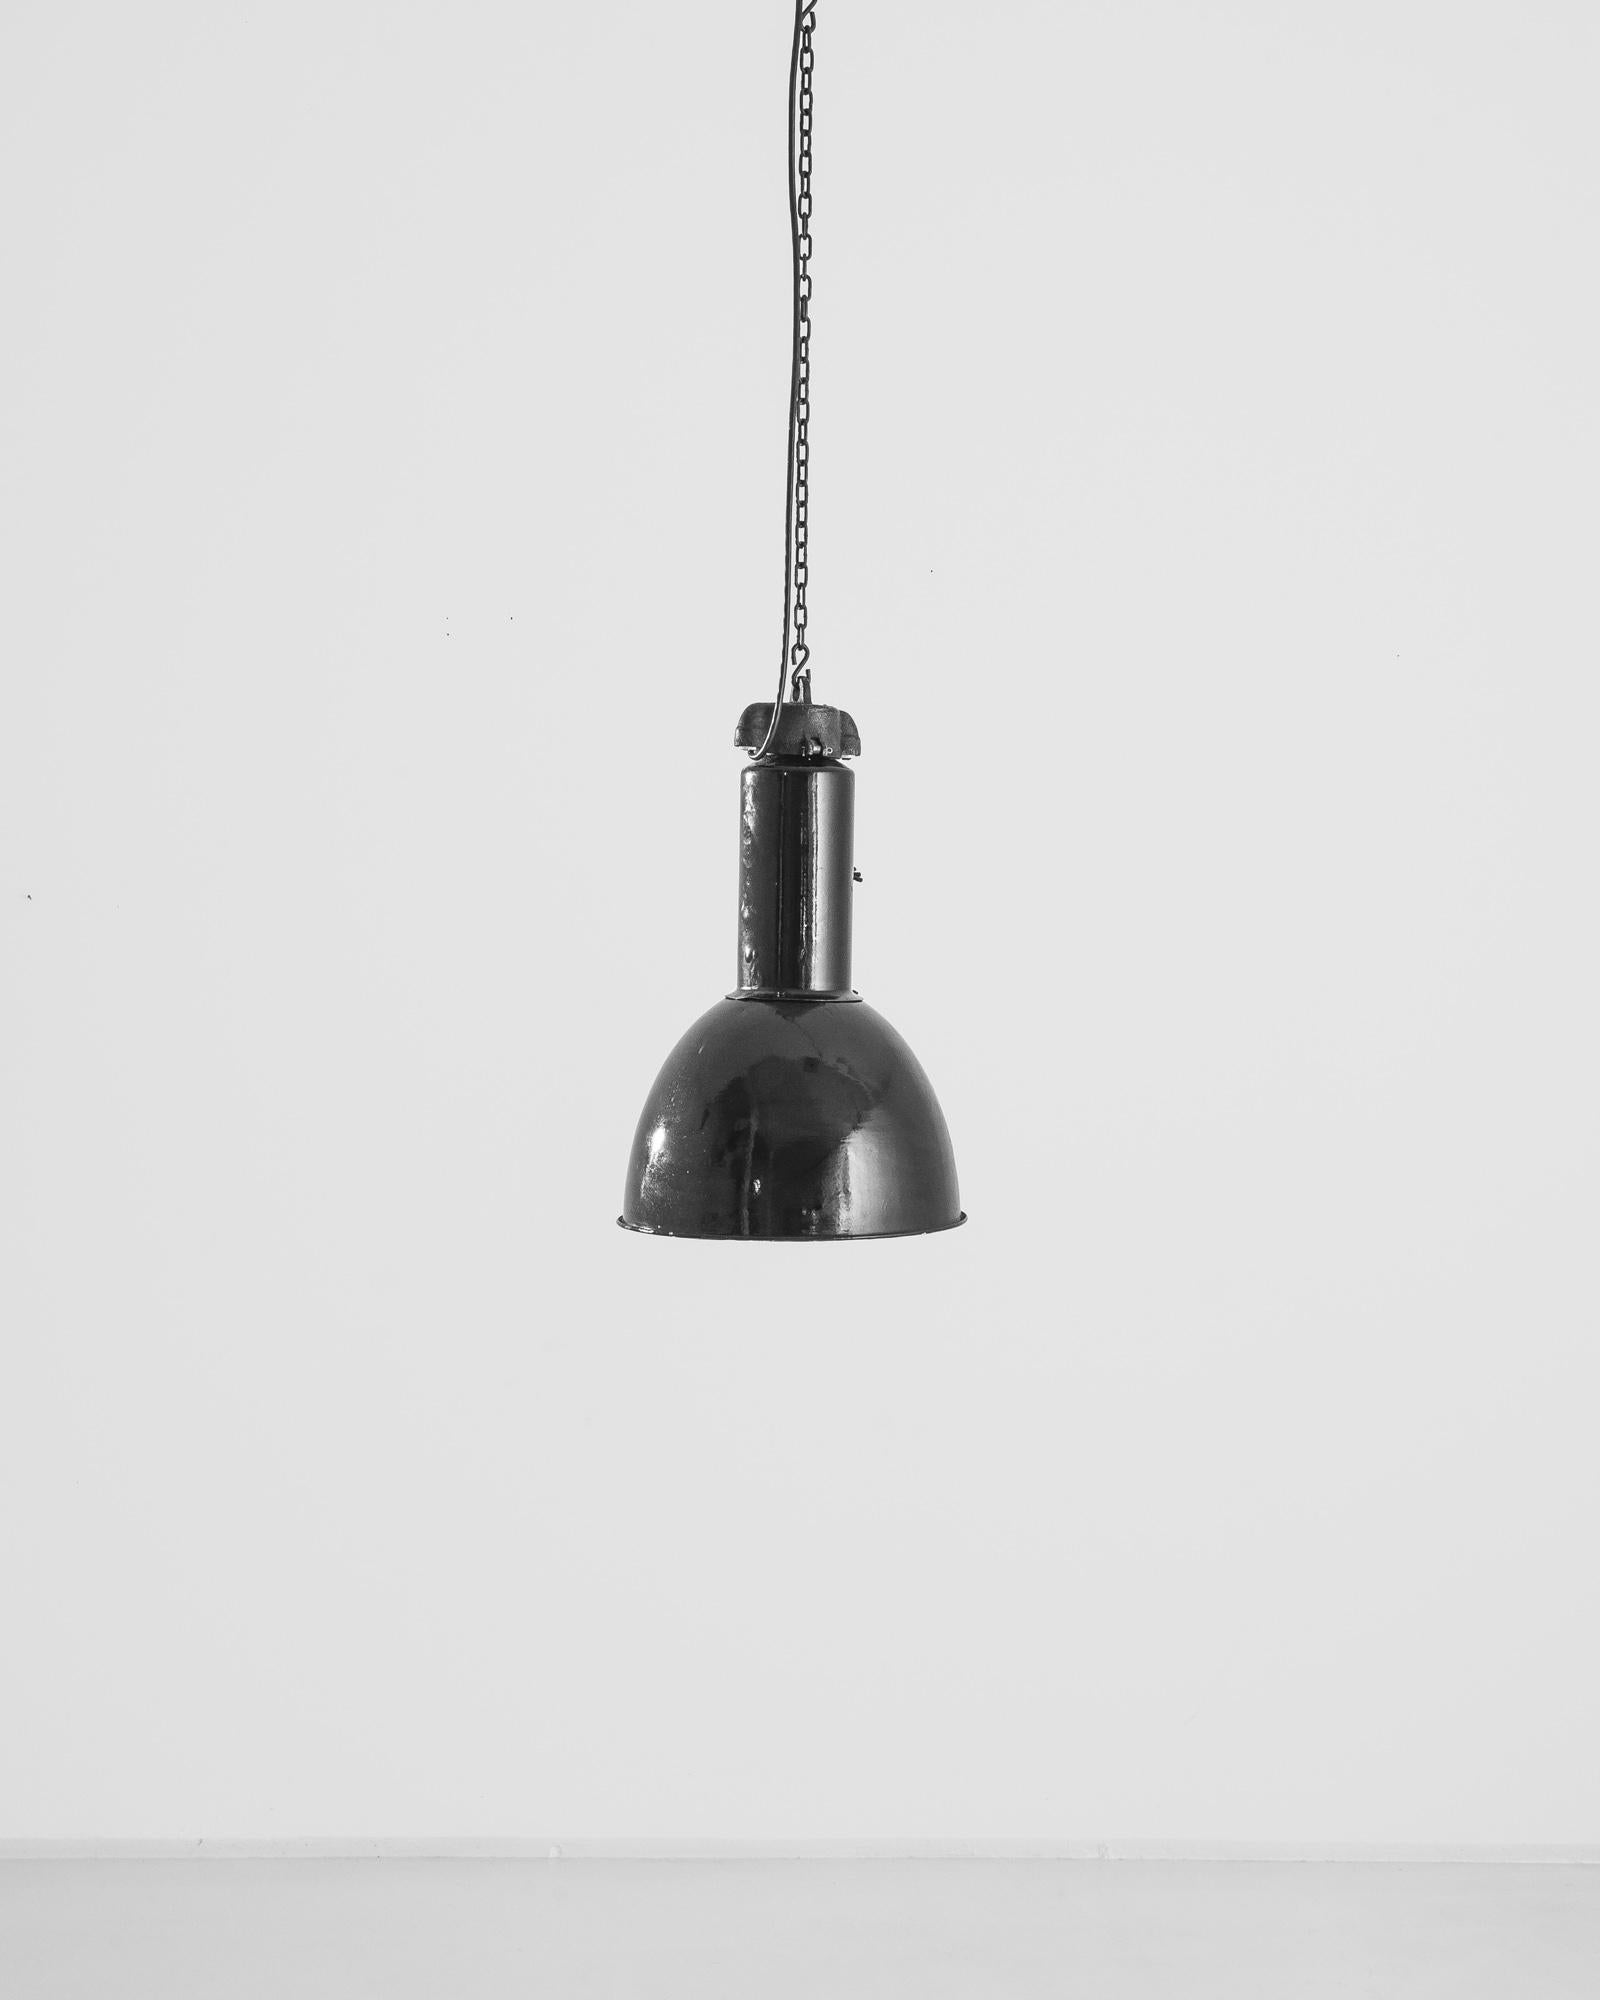 This 1930s Czech Industrial Pendant Lamp is an embodiment of raw, utilitarian design that has stood the test of time. Its enigmatic dark finish and robust metal construction speak of an era when products were made to last. The lamp features a